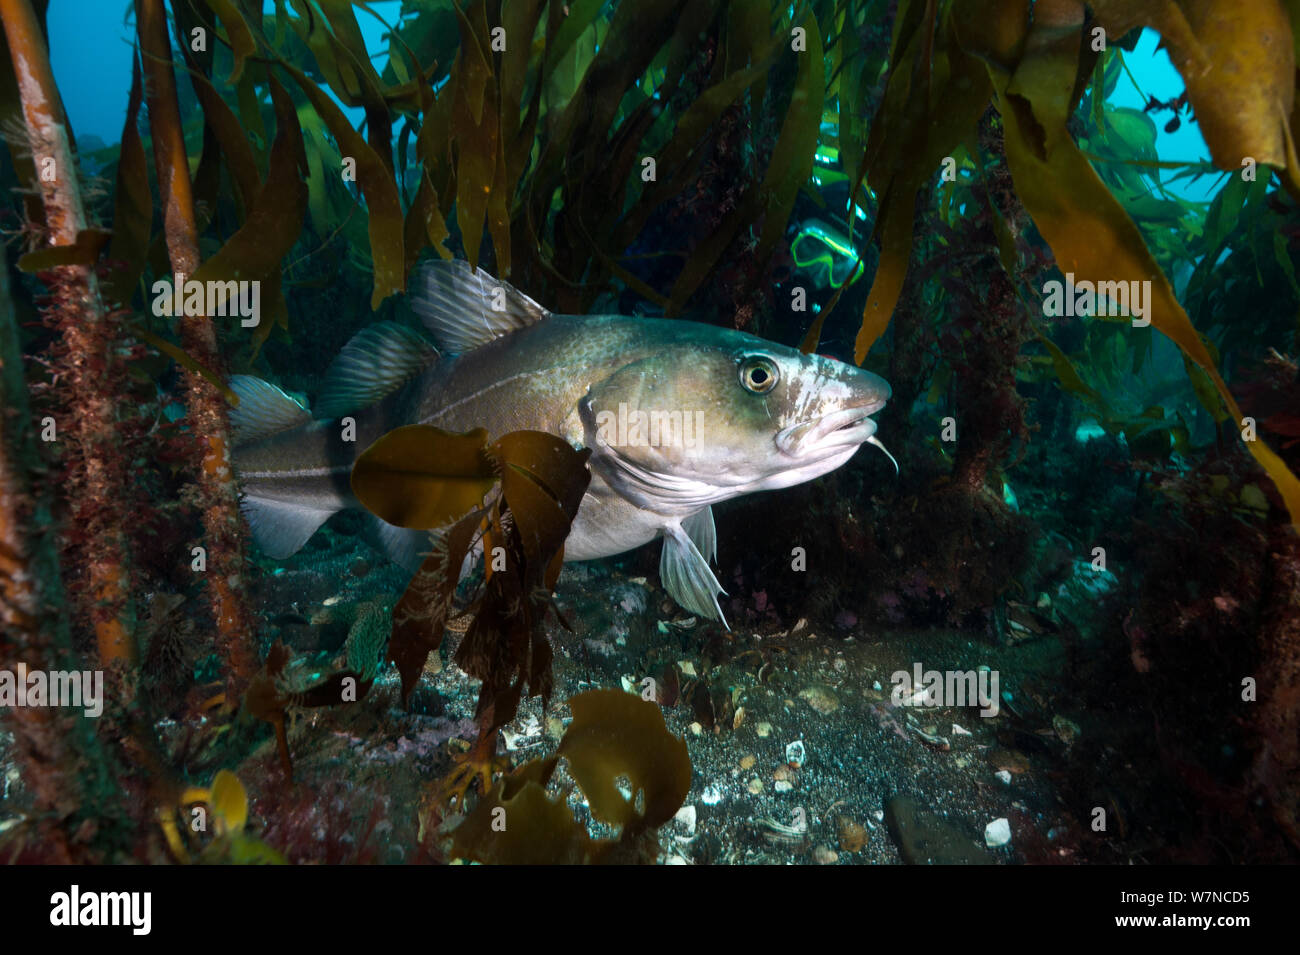 A diver approaches a large Atlantic cod (Gadus morhua) in a kelp forest.  Photographed during a two week break in fishing (to allow the fish to spawn), although this fish shows sign of a previous encounter with a net. Thorshofn, Iceland. North Atlantic Ocean, April 2012, model released. Stock Photo